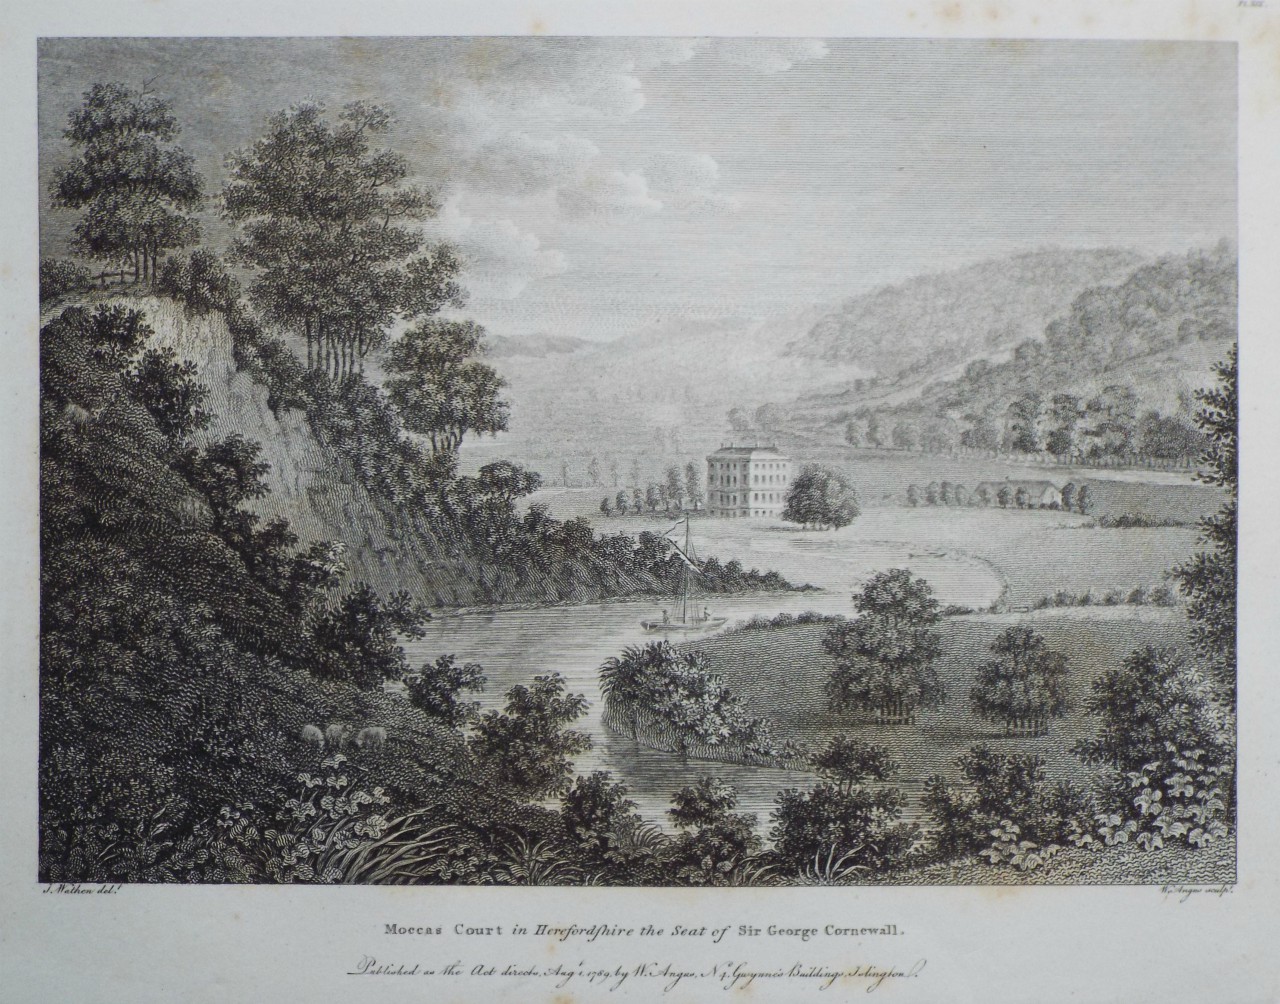 Print - Moccas Court in Herefordshire the Seat of Sir George Cornewall. - Angus